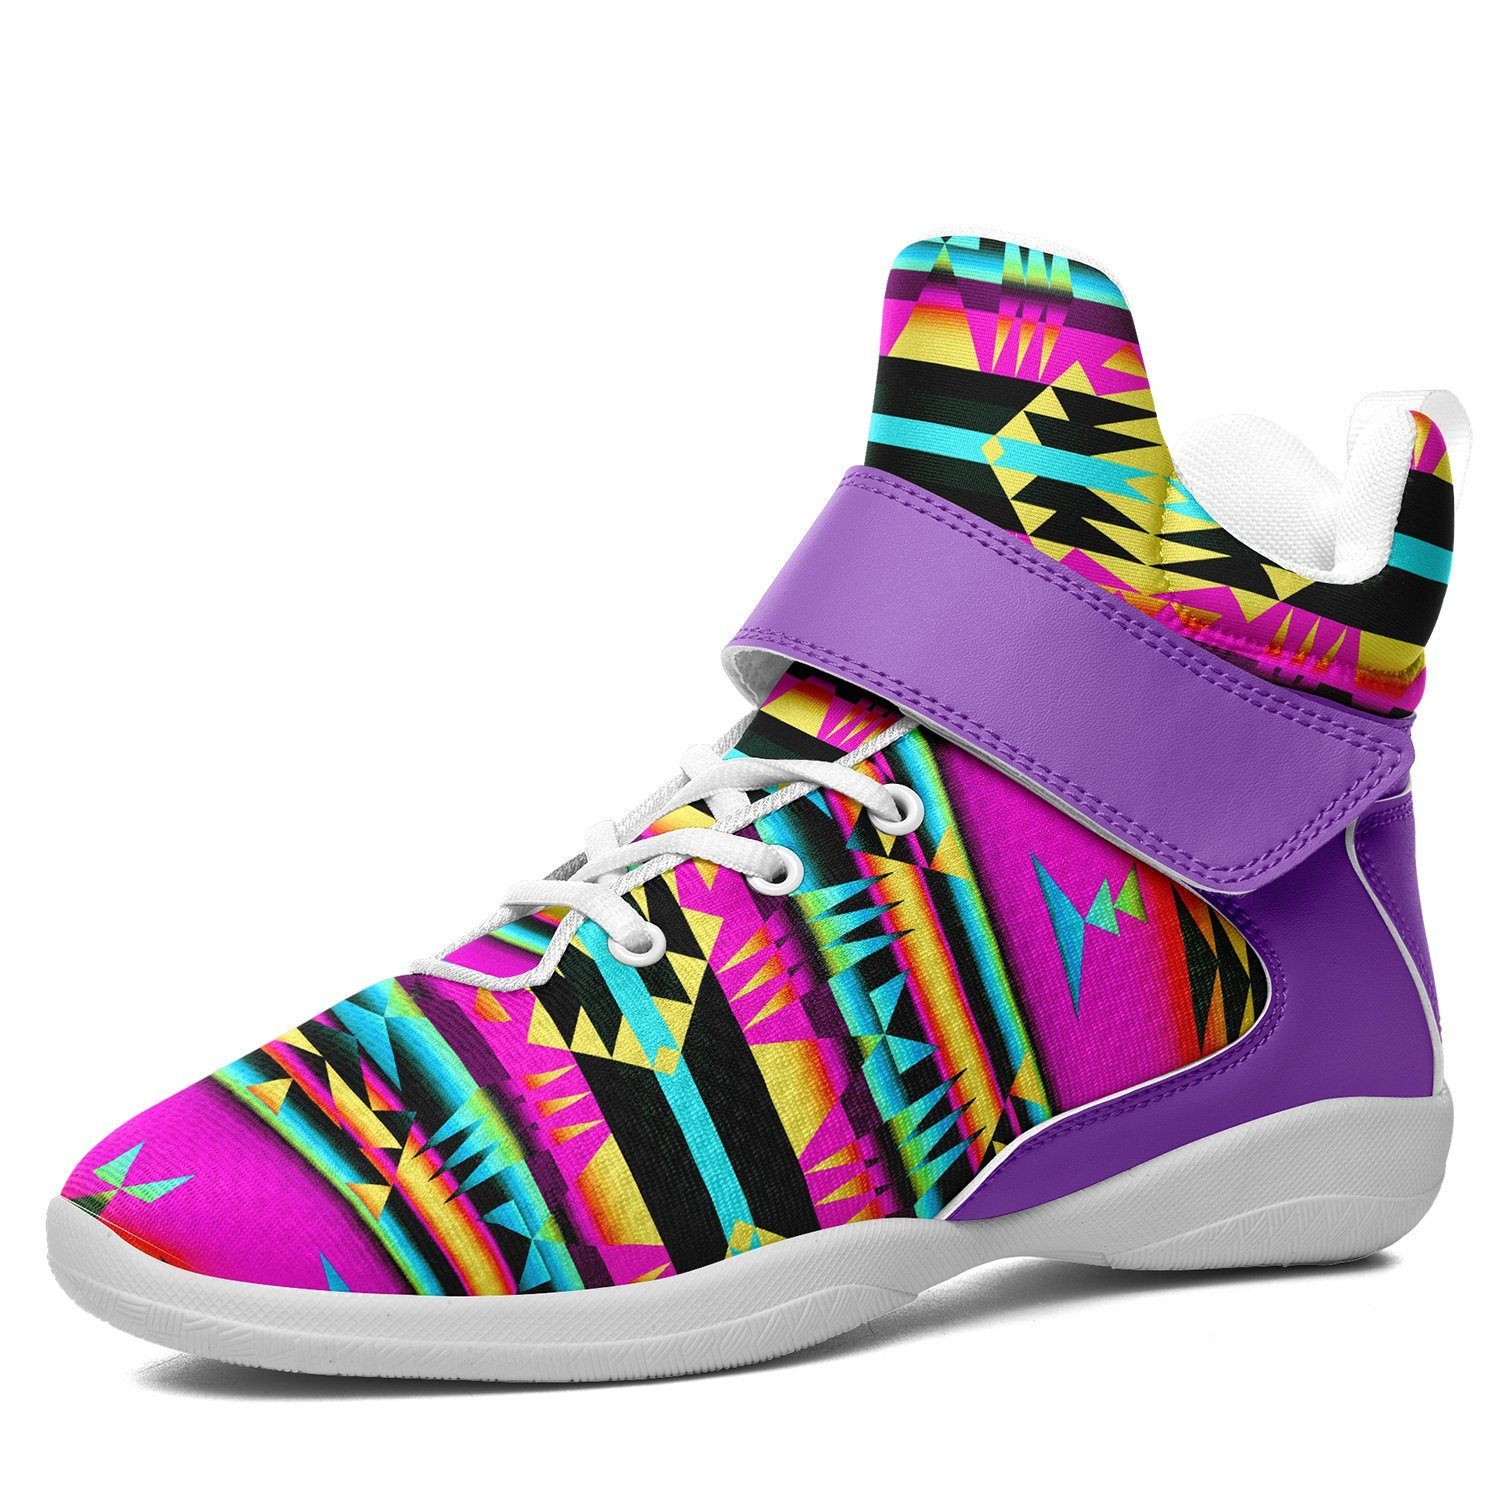 Between the Sunset Mountains Kid's Ipottaa Basketball / Sport High Top Shoes 49 Dzine US Child 12.5 / EUR 30 White Sole with Lavender Strap 